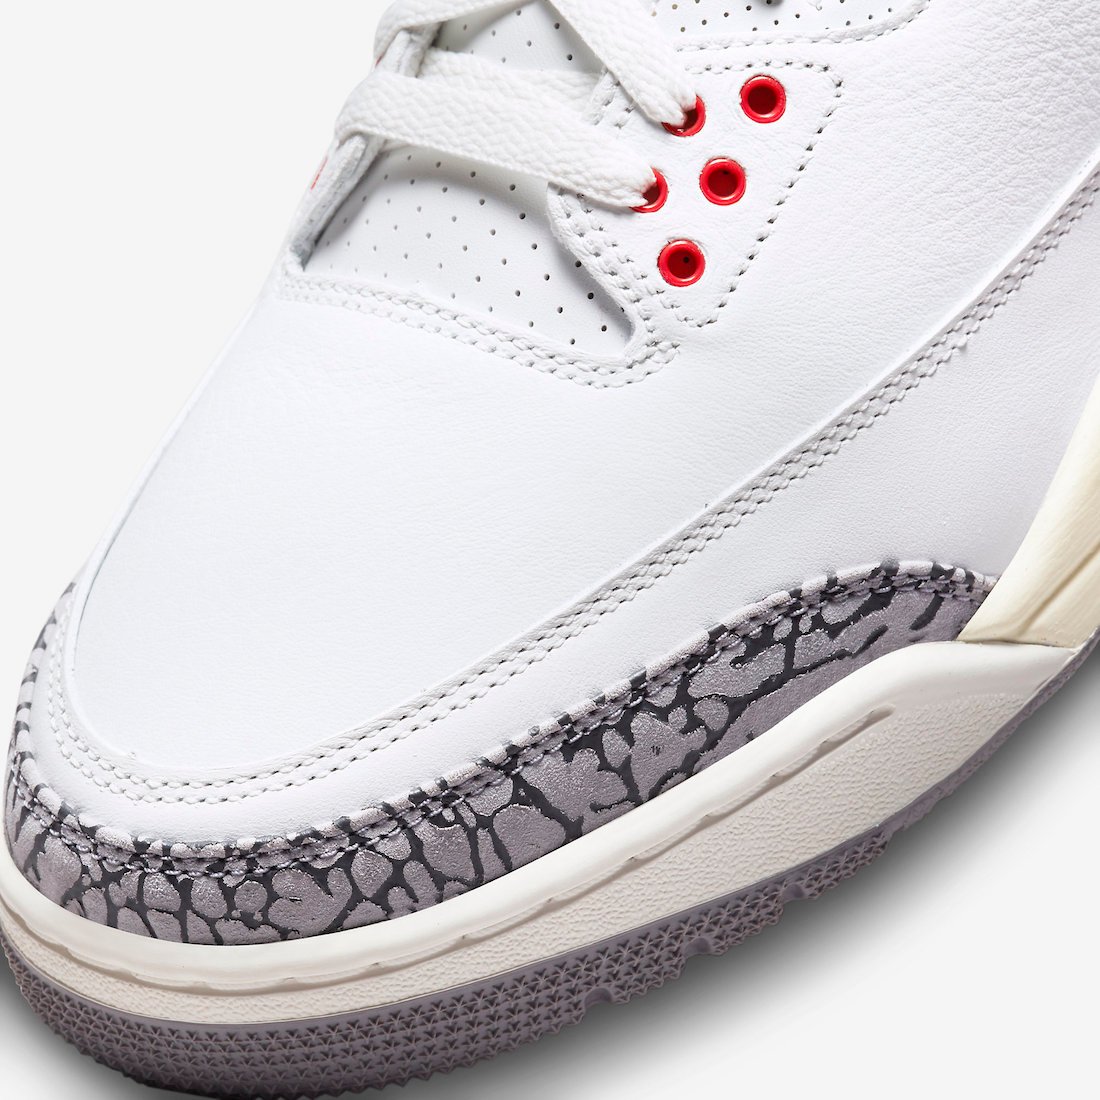 Air Jordan 3 White Cement Reimagined DN3707-100 Release Date Price